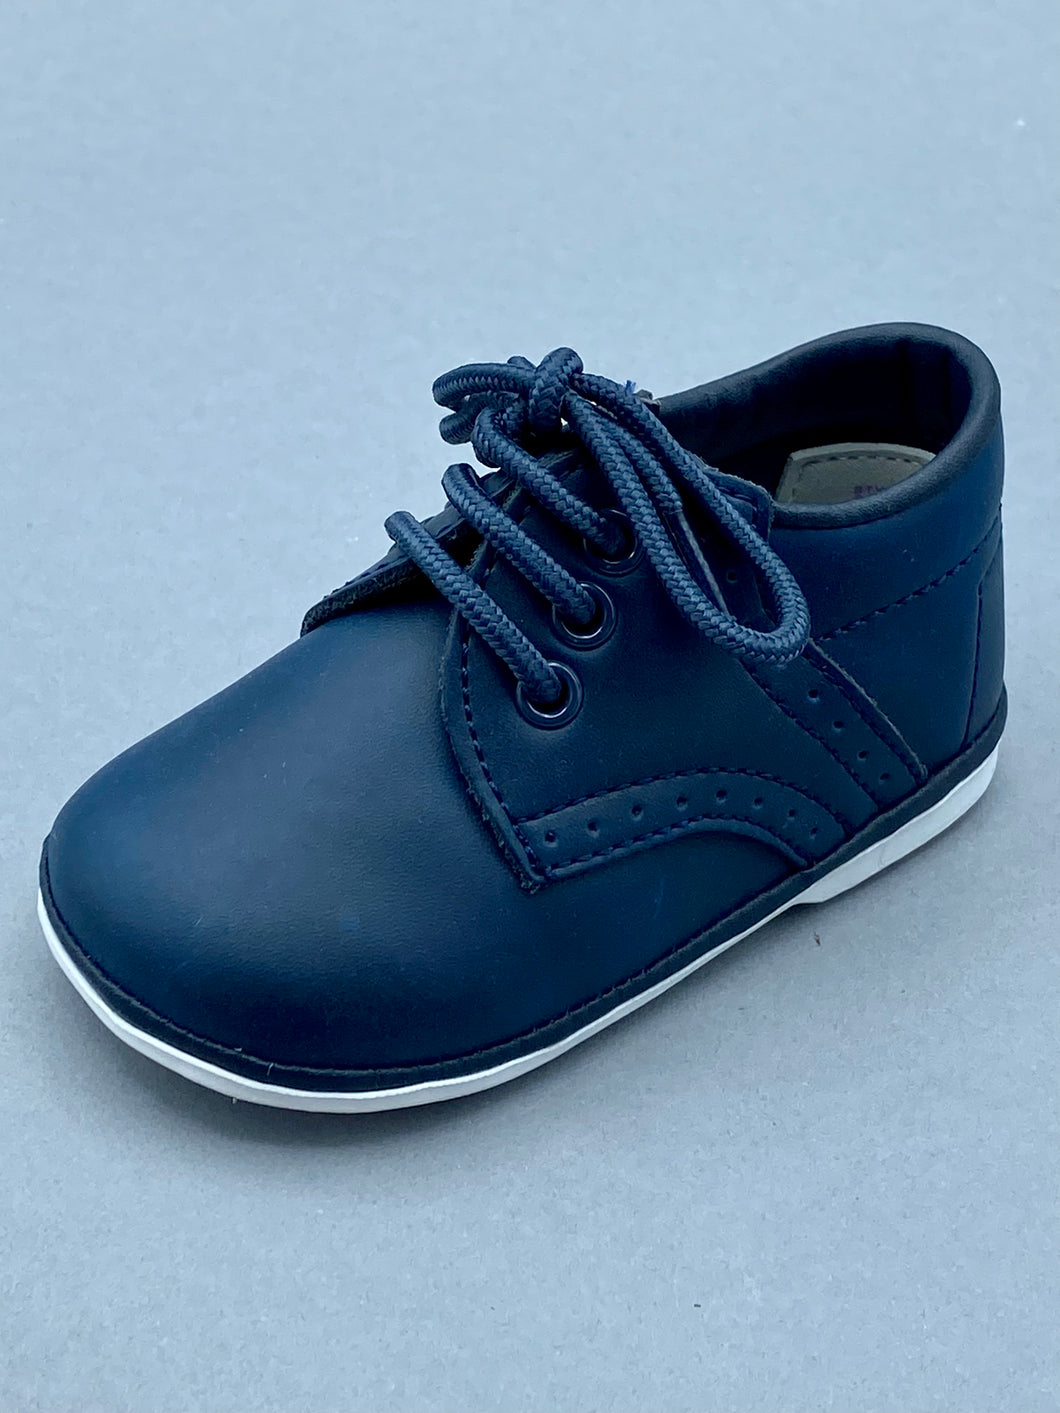 Navy Blue Leather and White Sole with Laces Walking shoe